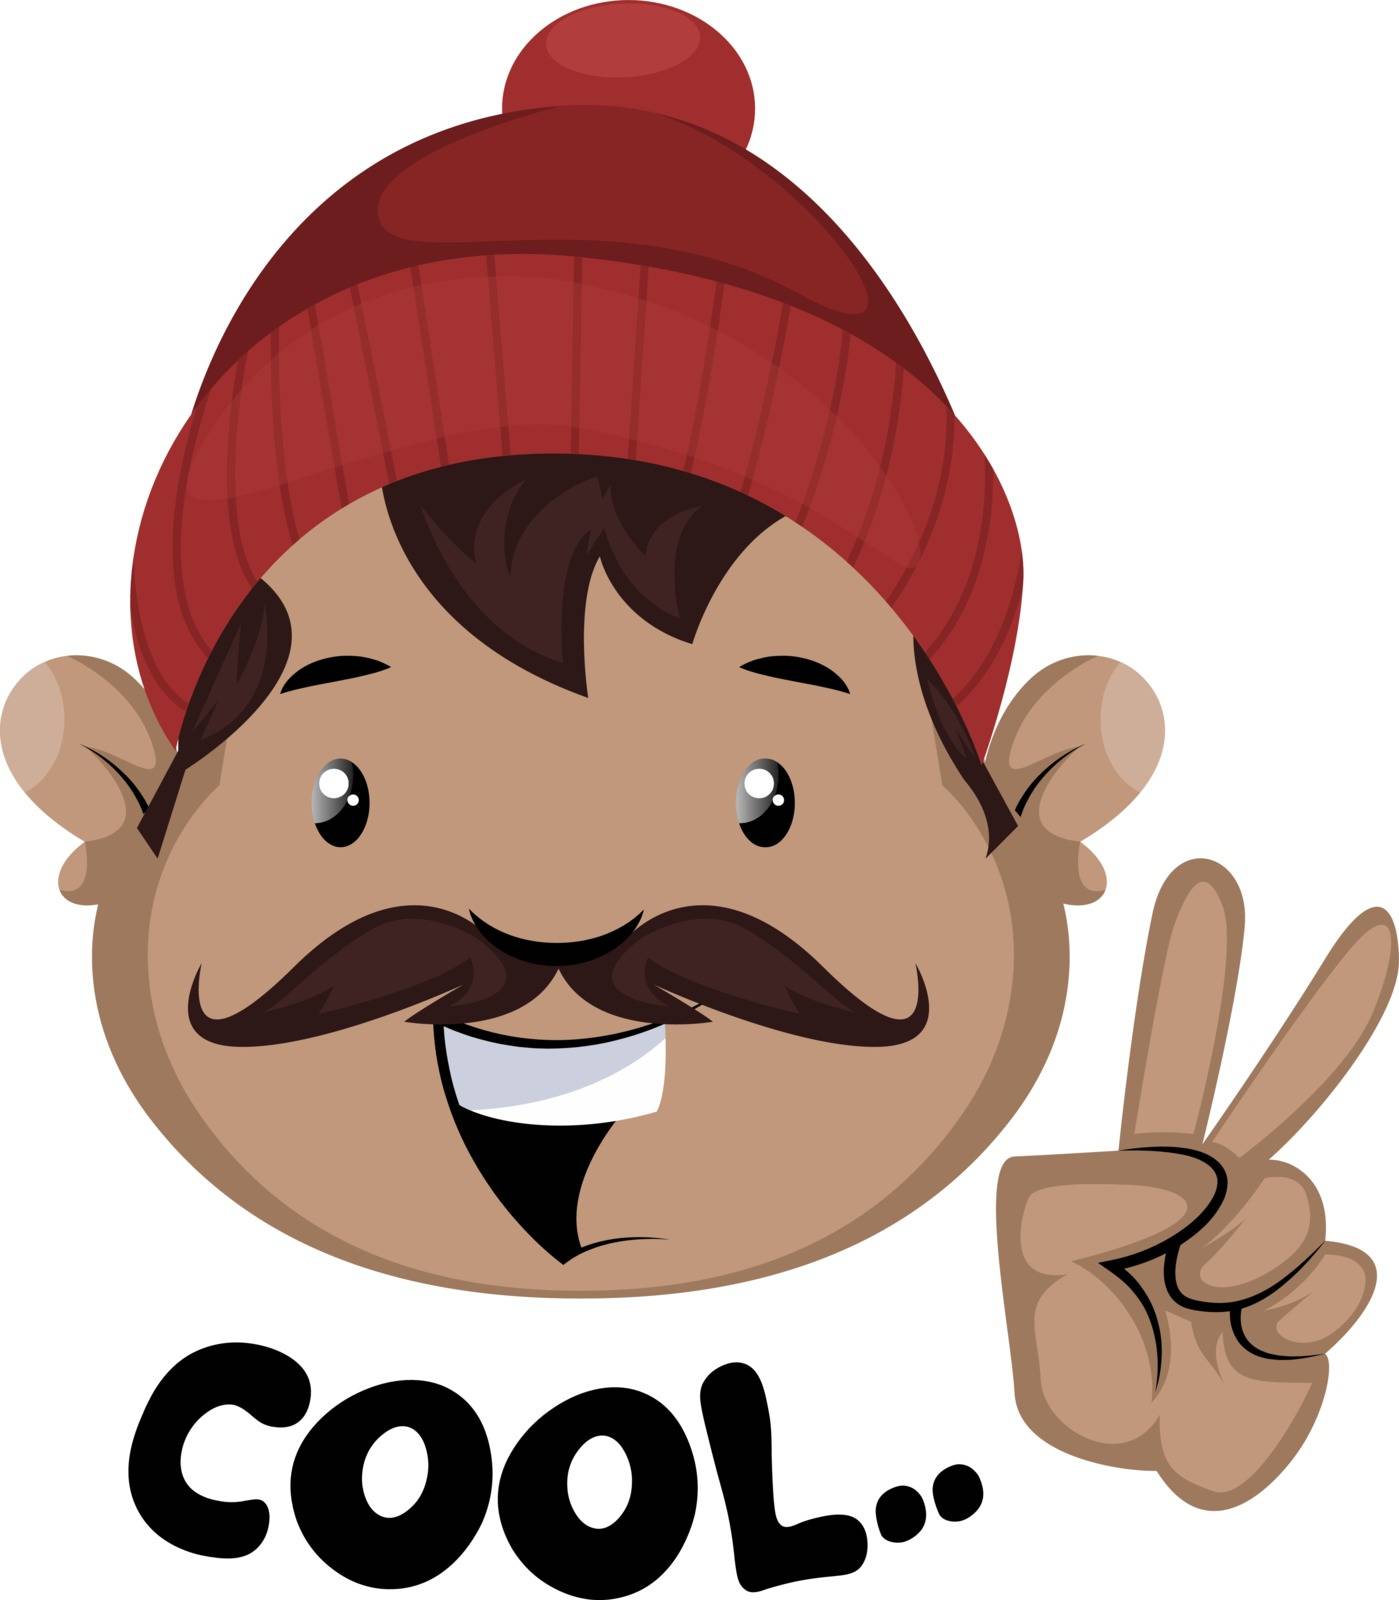 Man is showing cool with hand gesture, illustration, vector on white background.